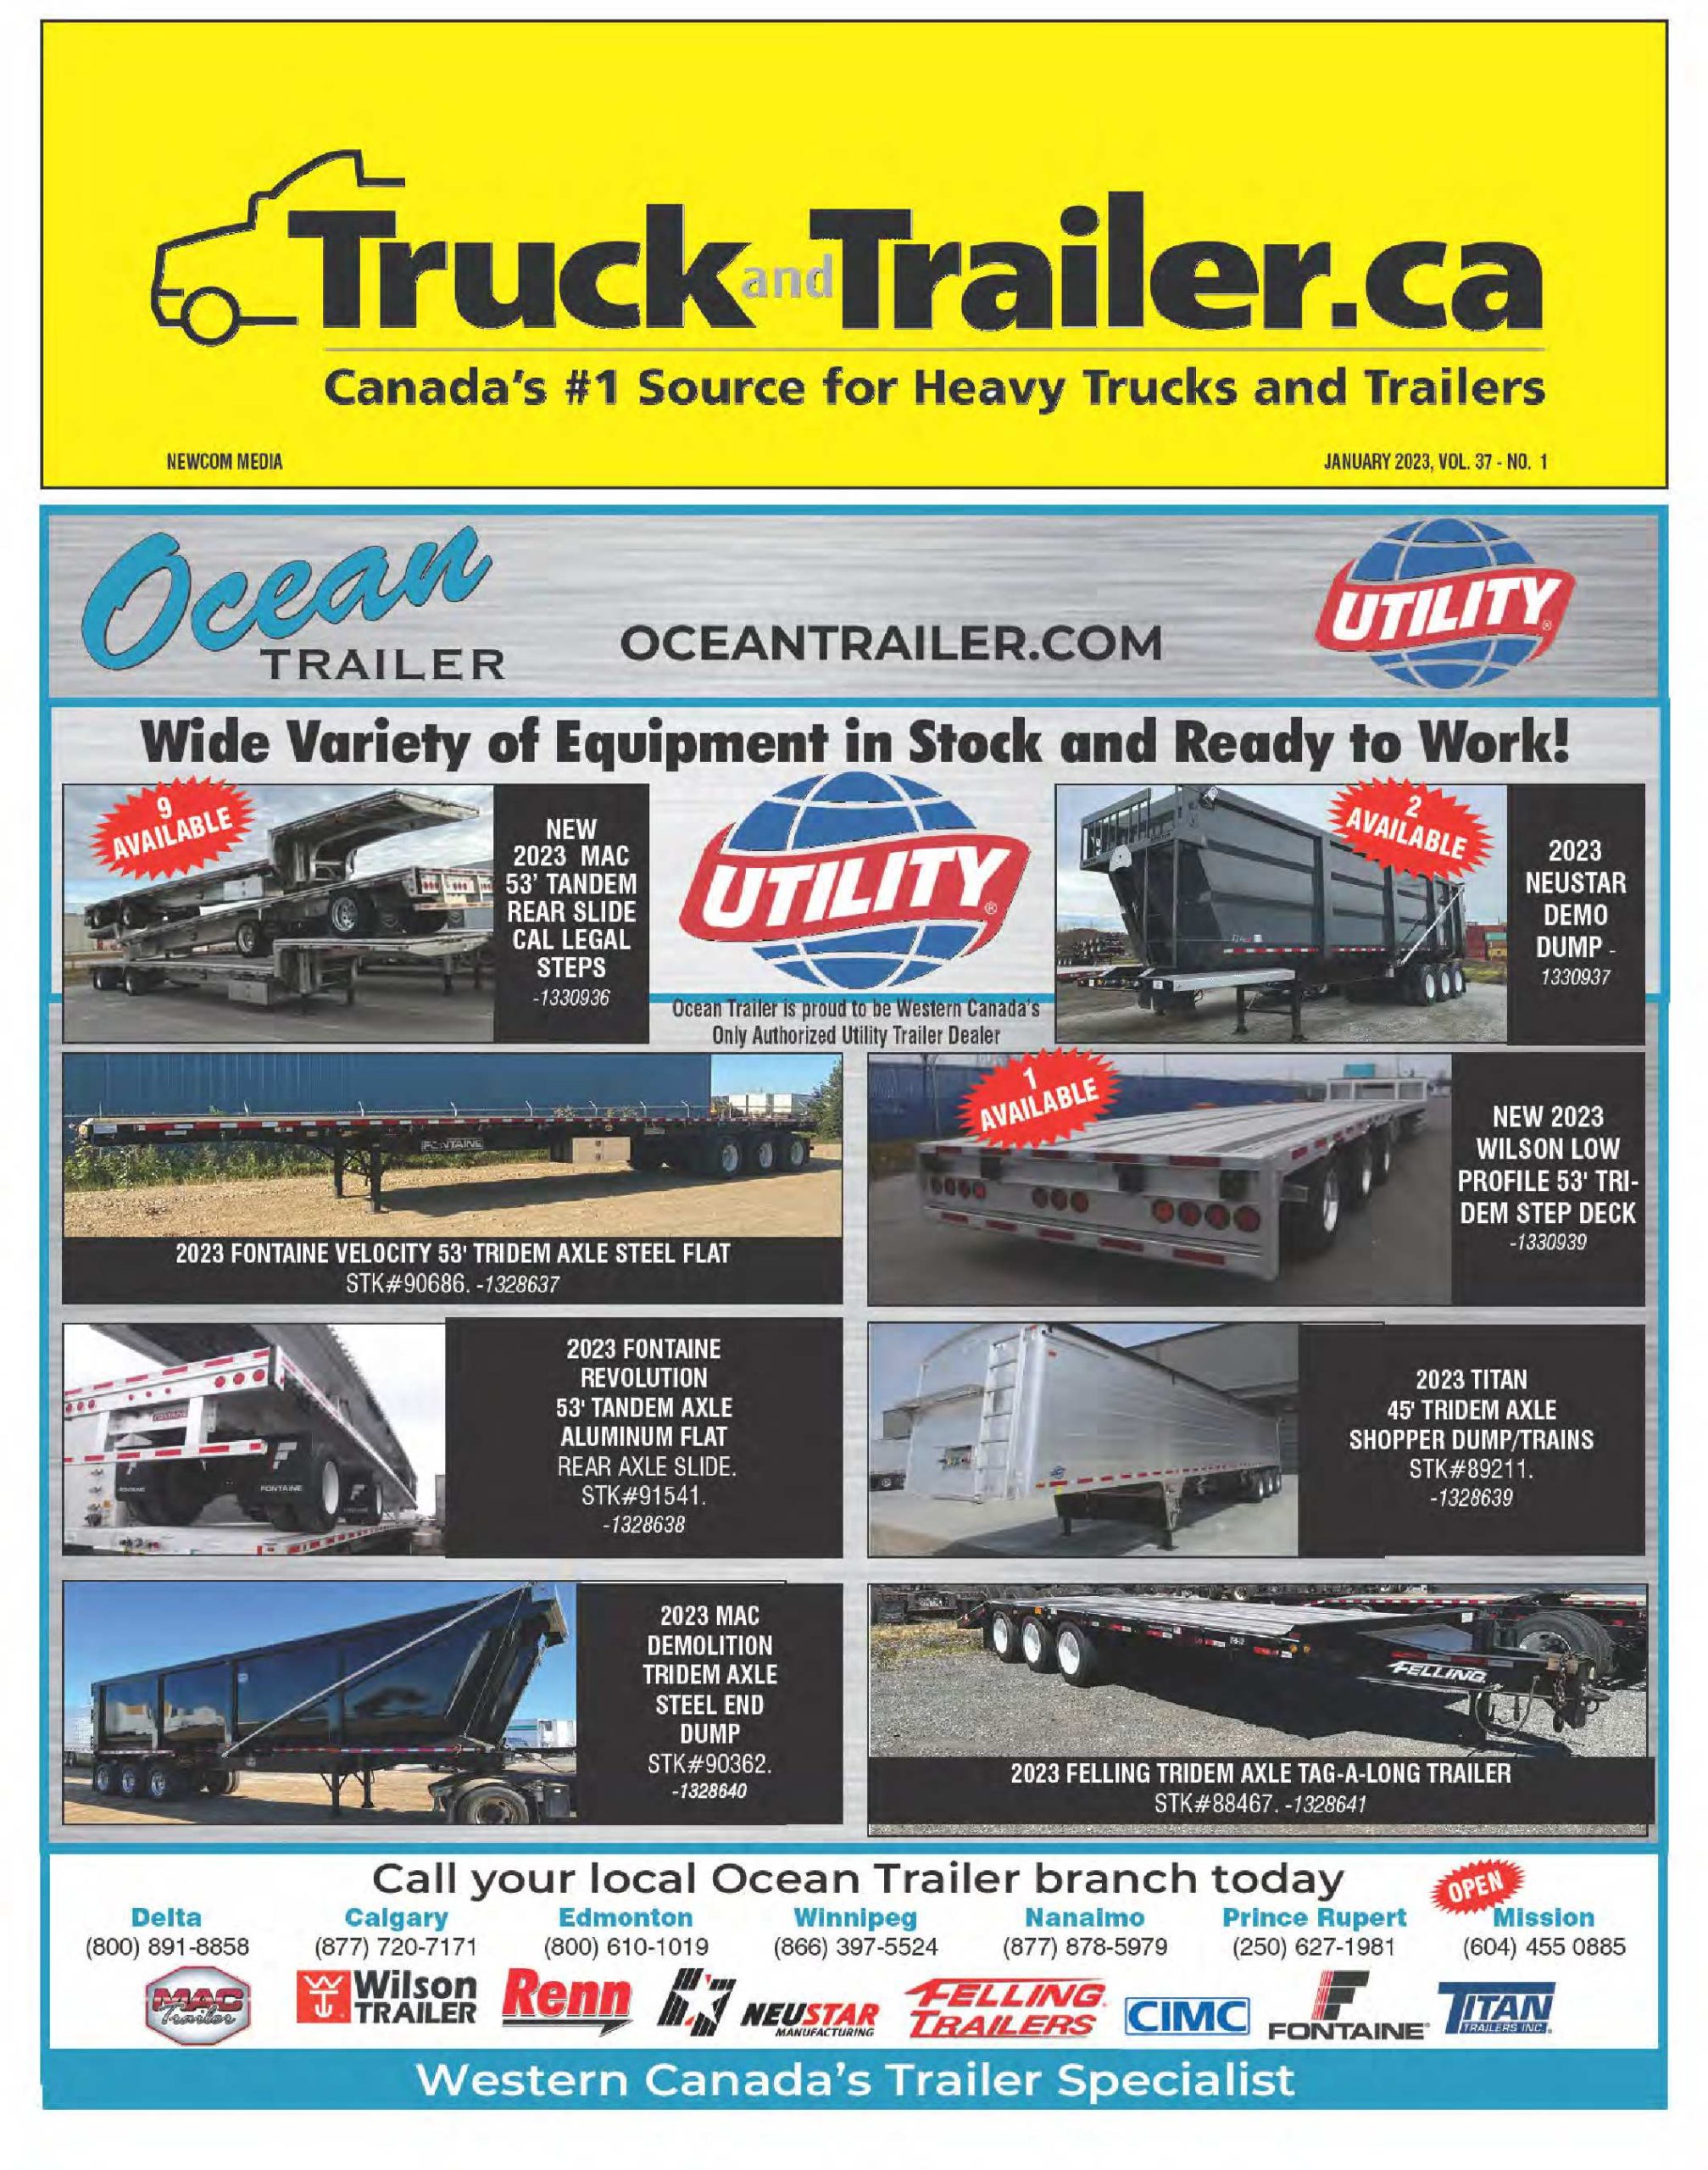 Truck and Trailer – 1 janvier 2023